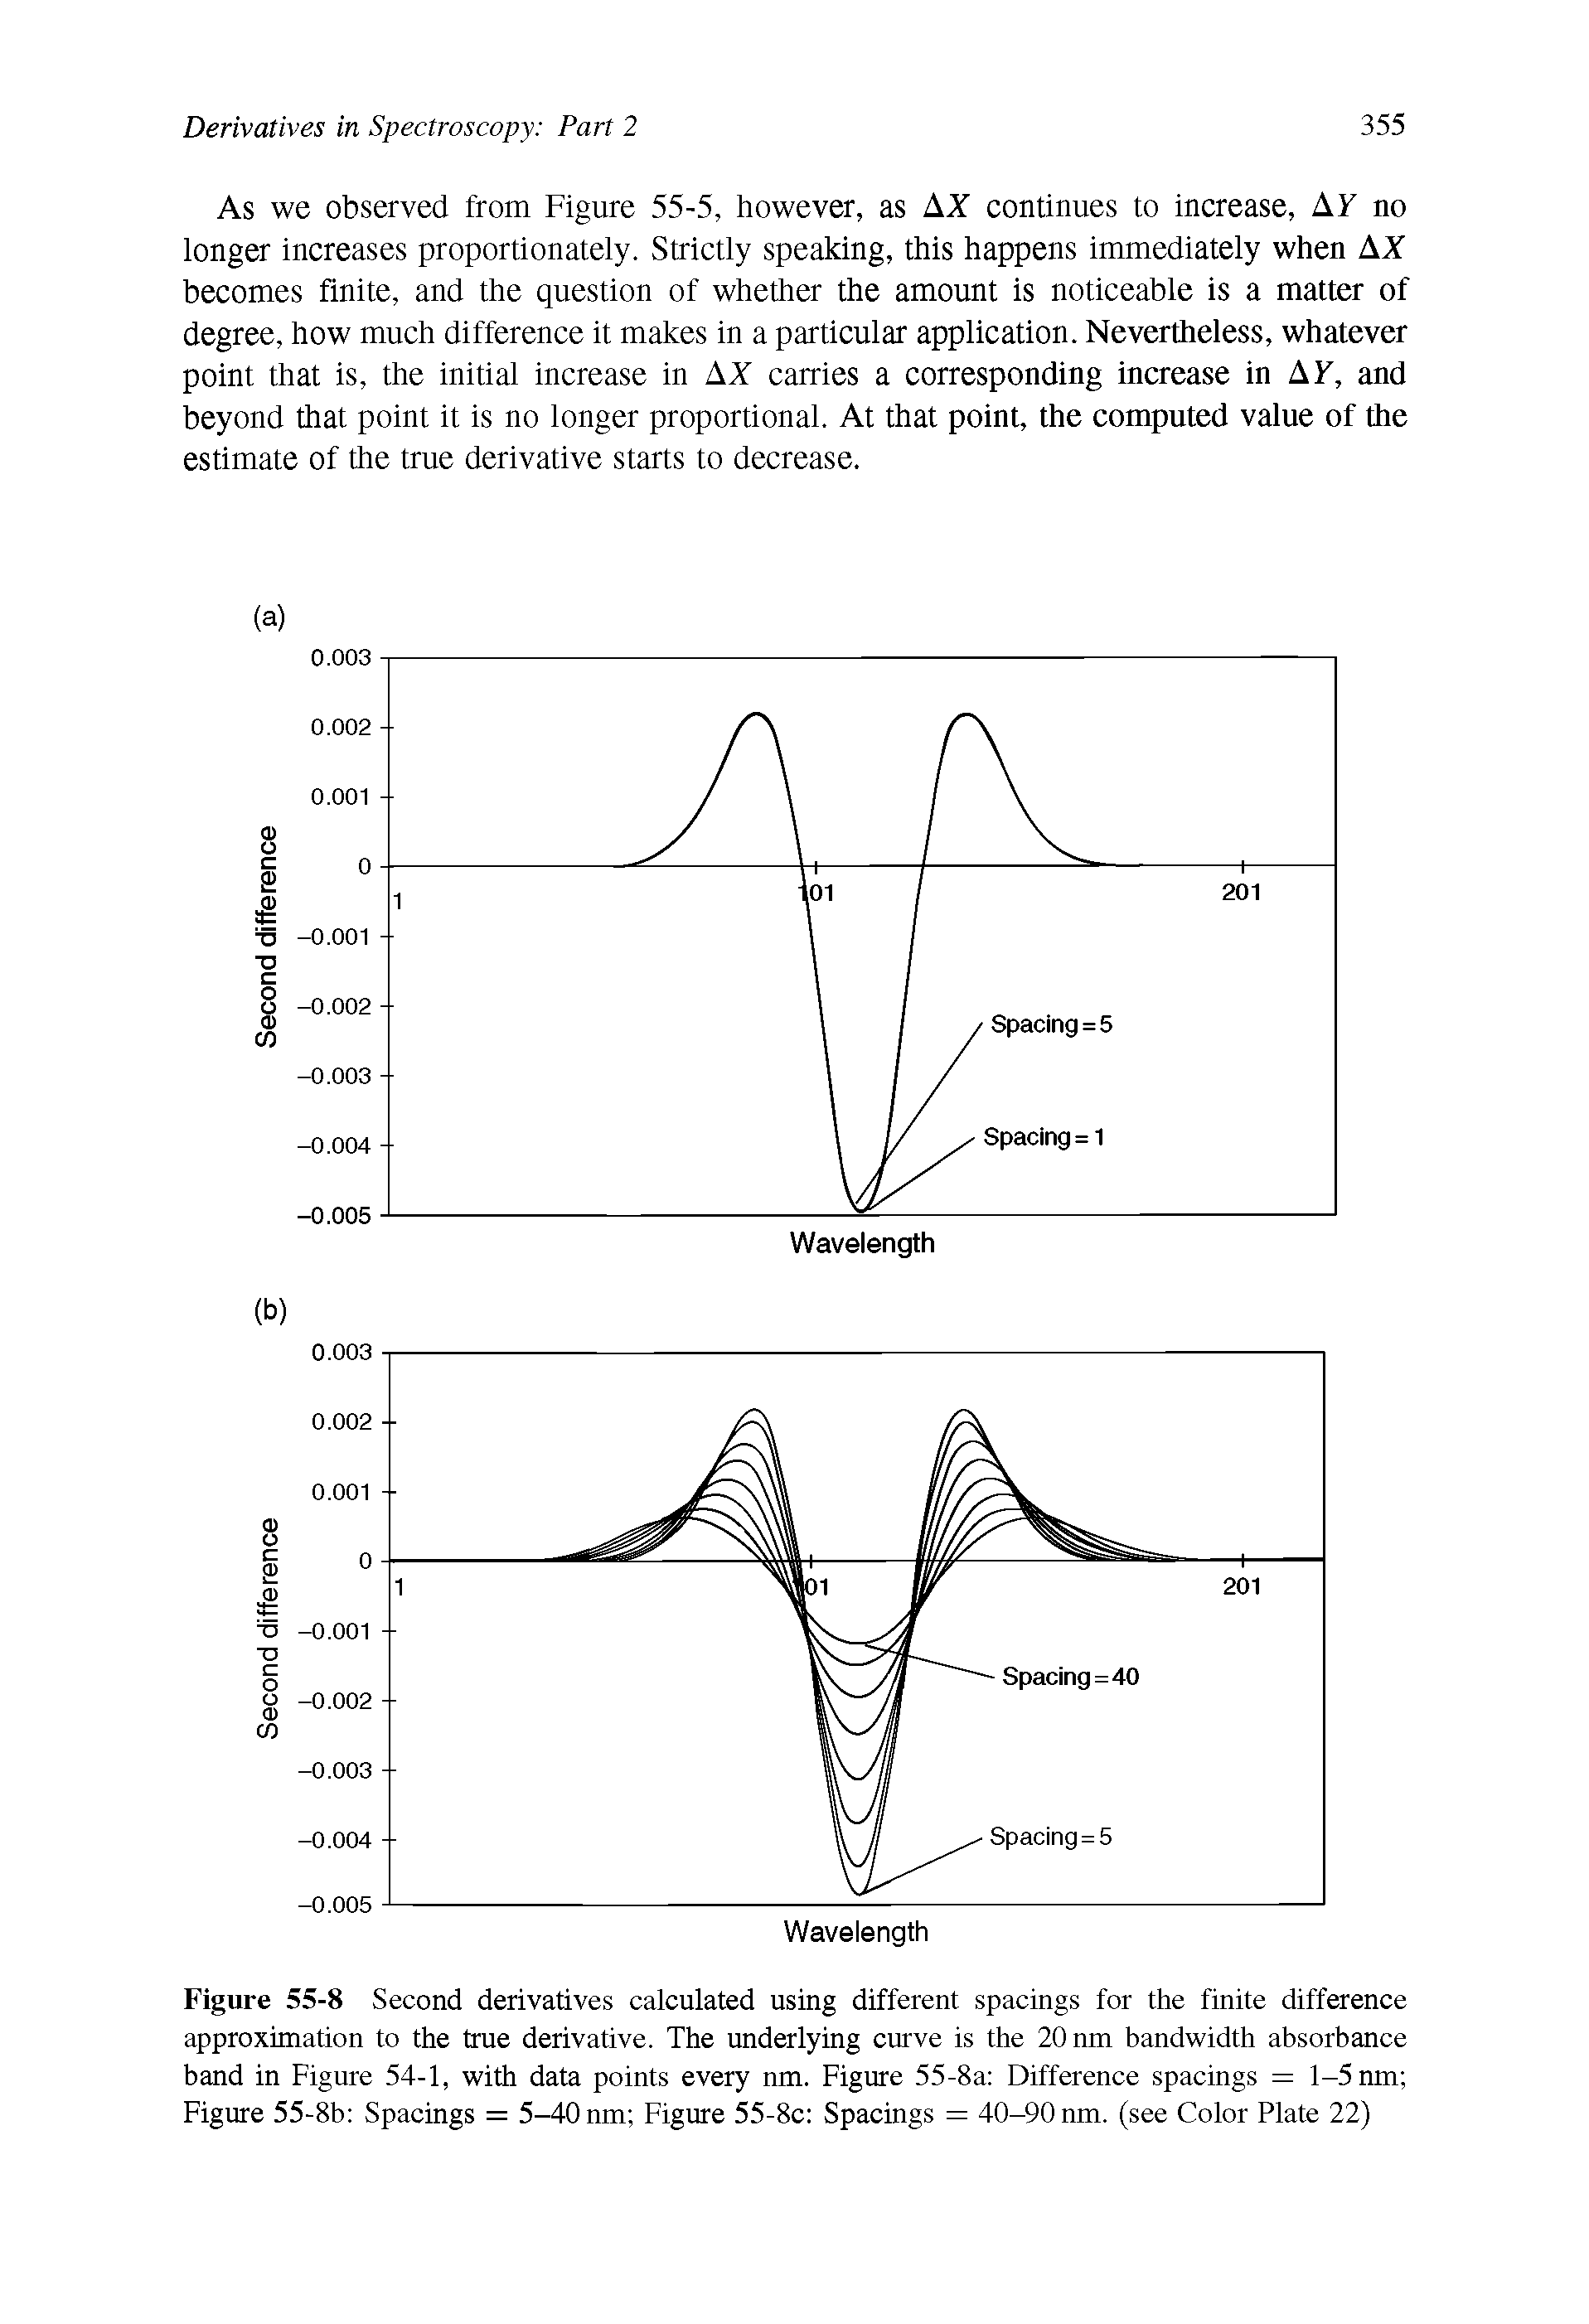 Figure 55-8 Second derivatives calculated using different spacings for the finite difference approximation to the true derivative. The underlying curve is the 20 nm bandwidth absorbance band in Figure 54-1, with data points every nm. Figure 55-8a Difference spacings = 1-5 nm Figure 55-8b Spacings = 5-40 nm Figure 55-8c Spacings = 40-90 nm. (see Color Plate 22)...